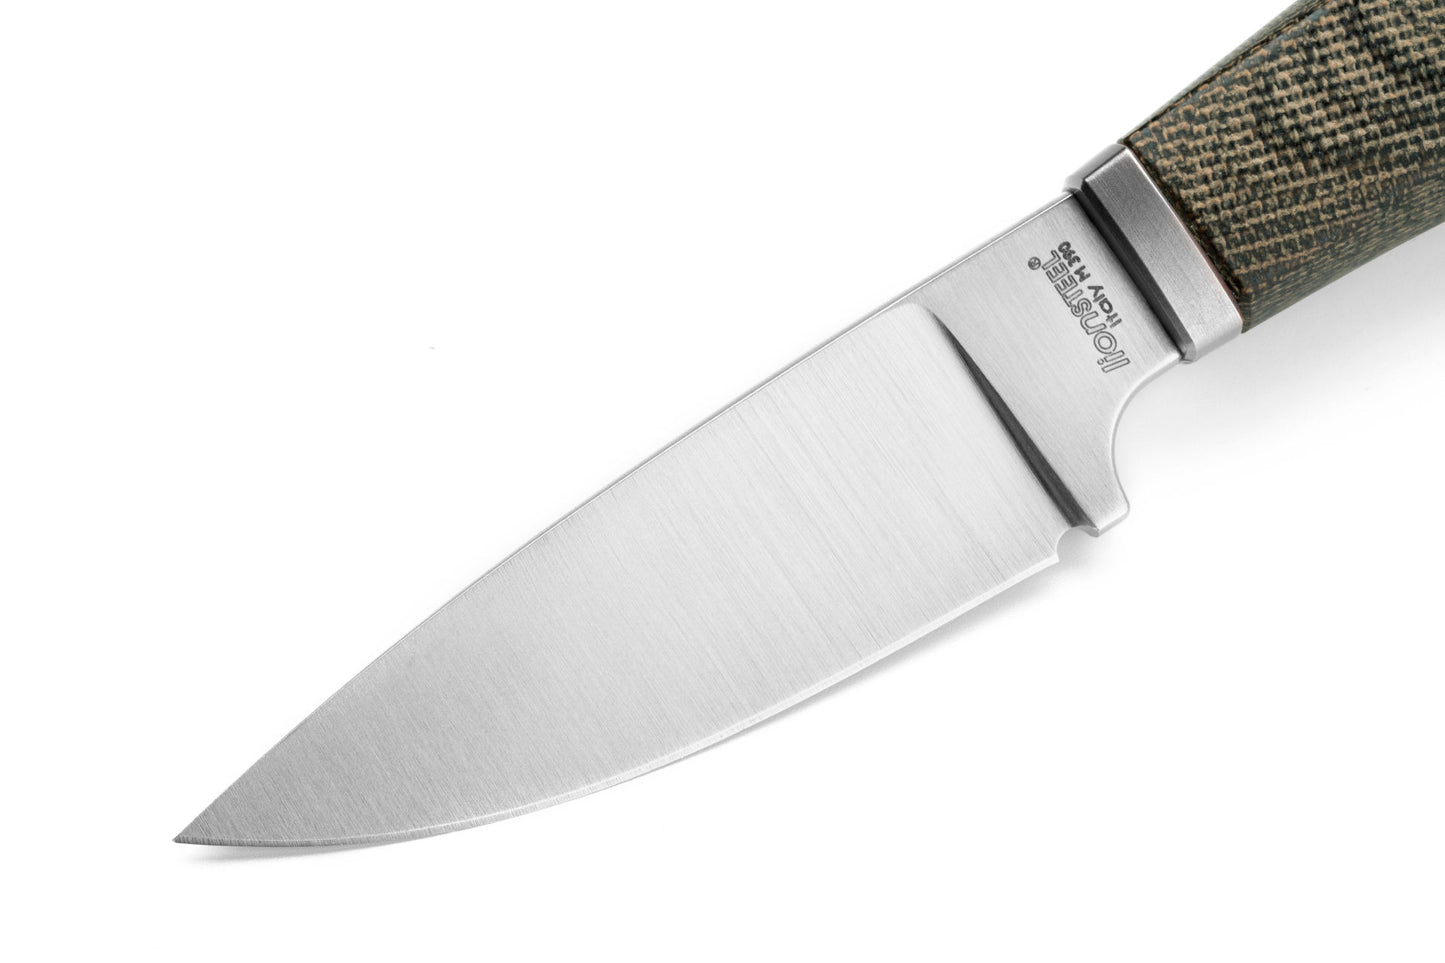 LionSteel Willy 2.56" M390 Green Canvas Micarta Fixed Blade Knife with Leather Sheath WL1 CVG